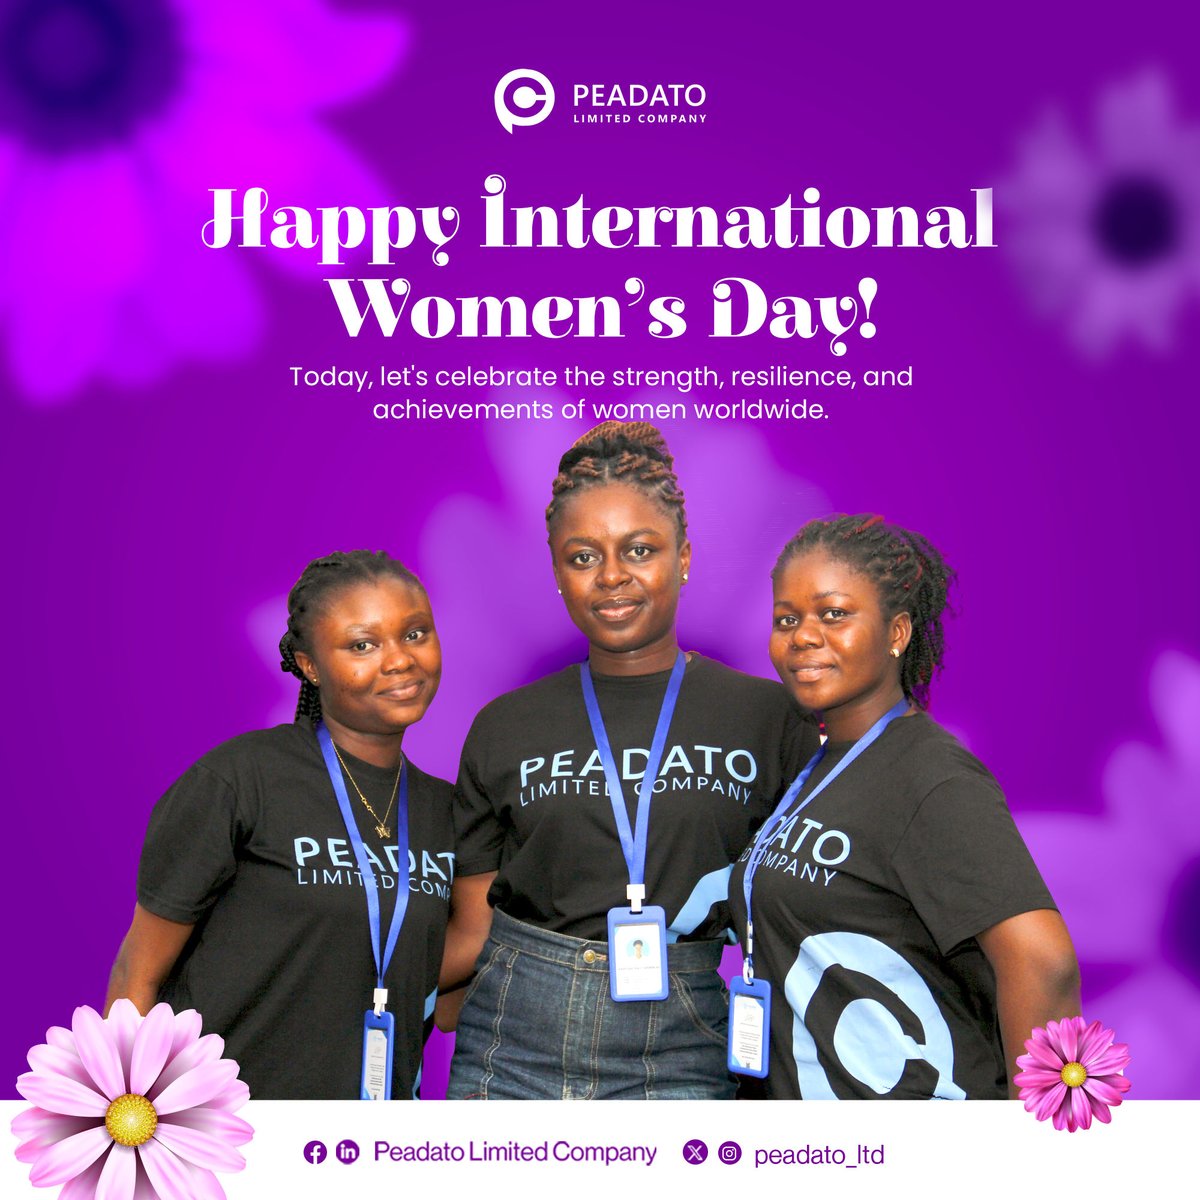 Happy International Women's Day! Celebrating the remarkable achievements and contributions of women worldwide. Empowering, inspiring, and breaking barriers.

#happywomensday 
#peadatolimitedcompany
#peadato
#womenempowerment 
#womenhelpingwomen 
#women 
#investinginwomen